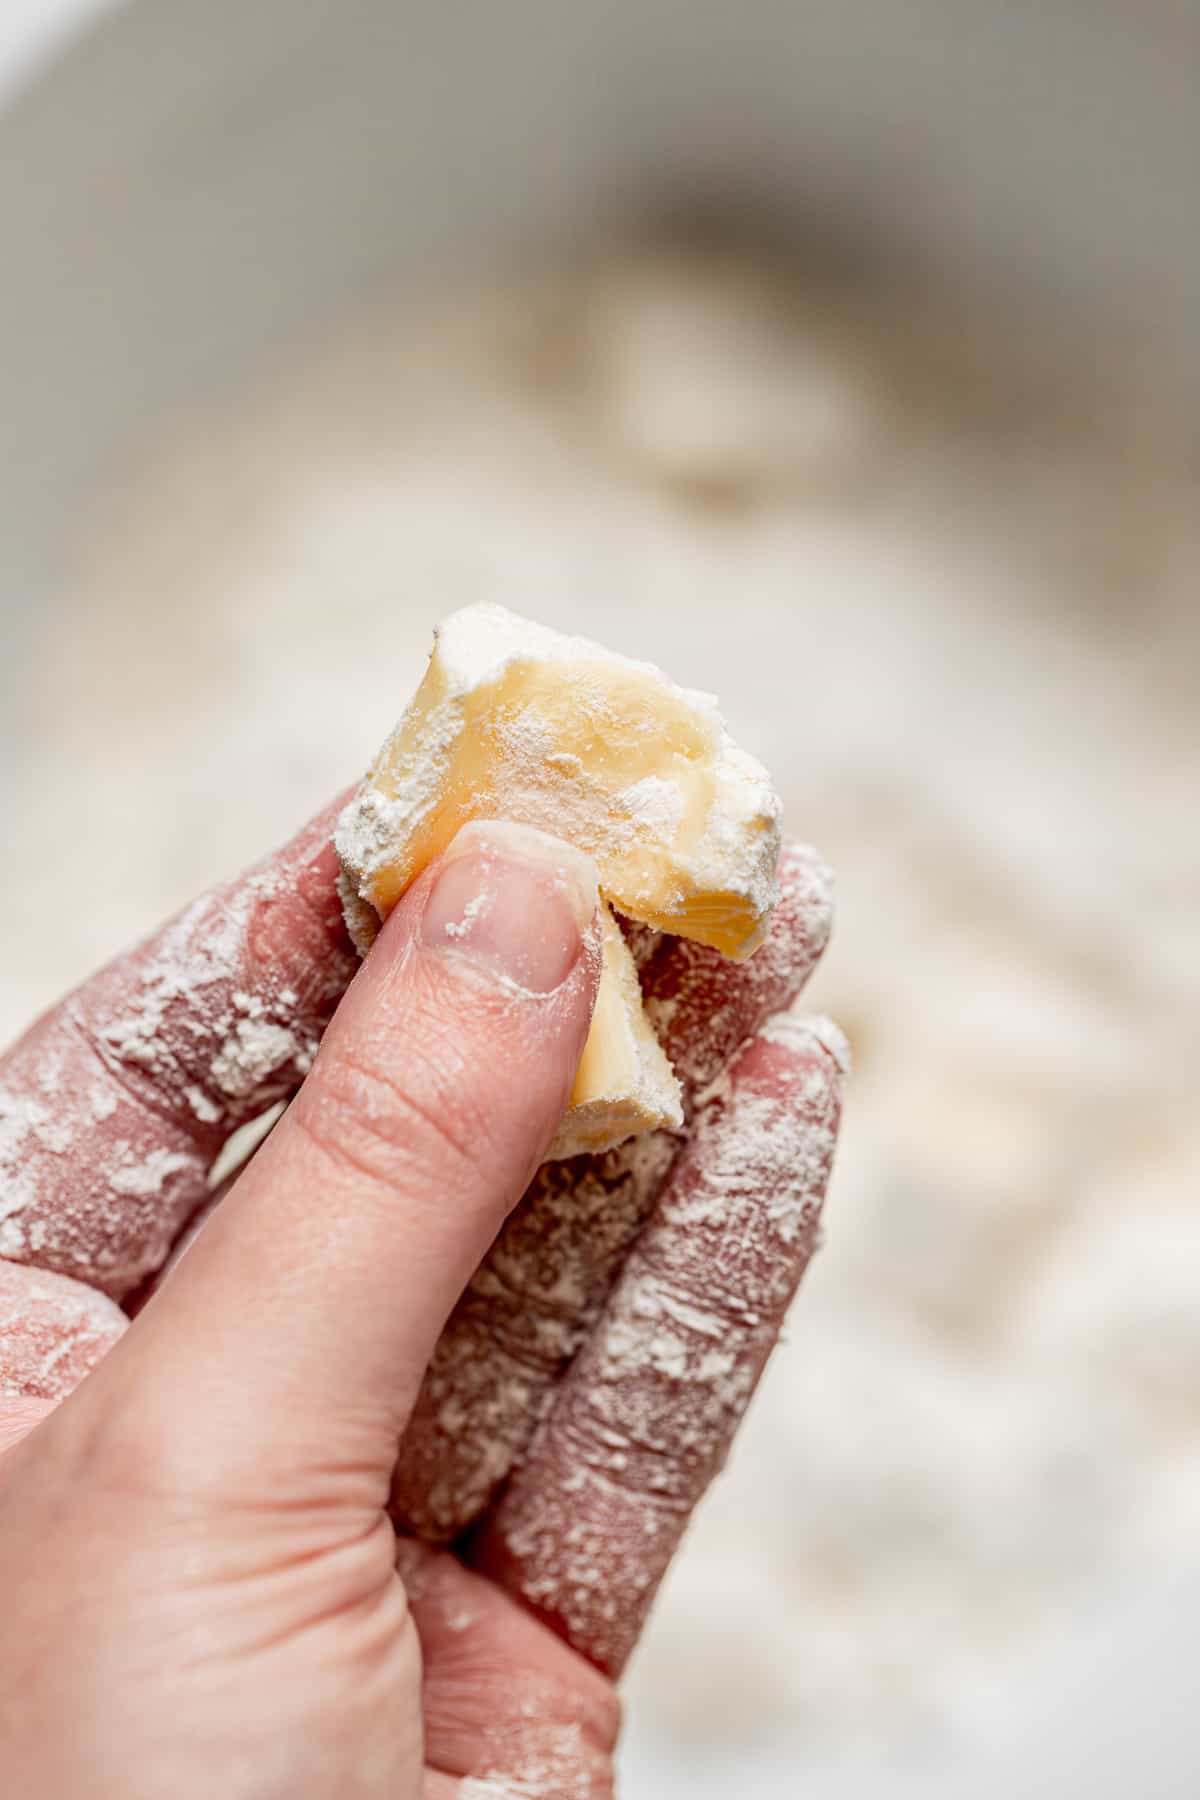 butter squished between fingers.